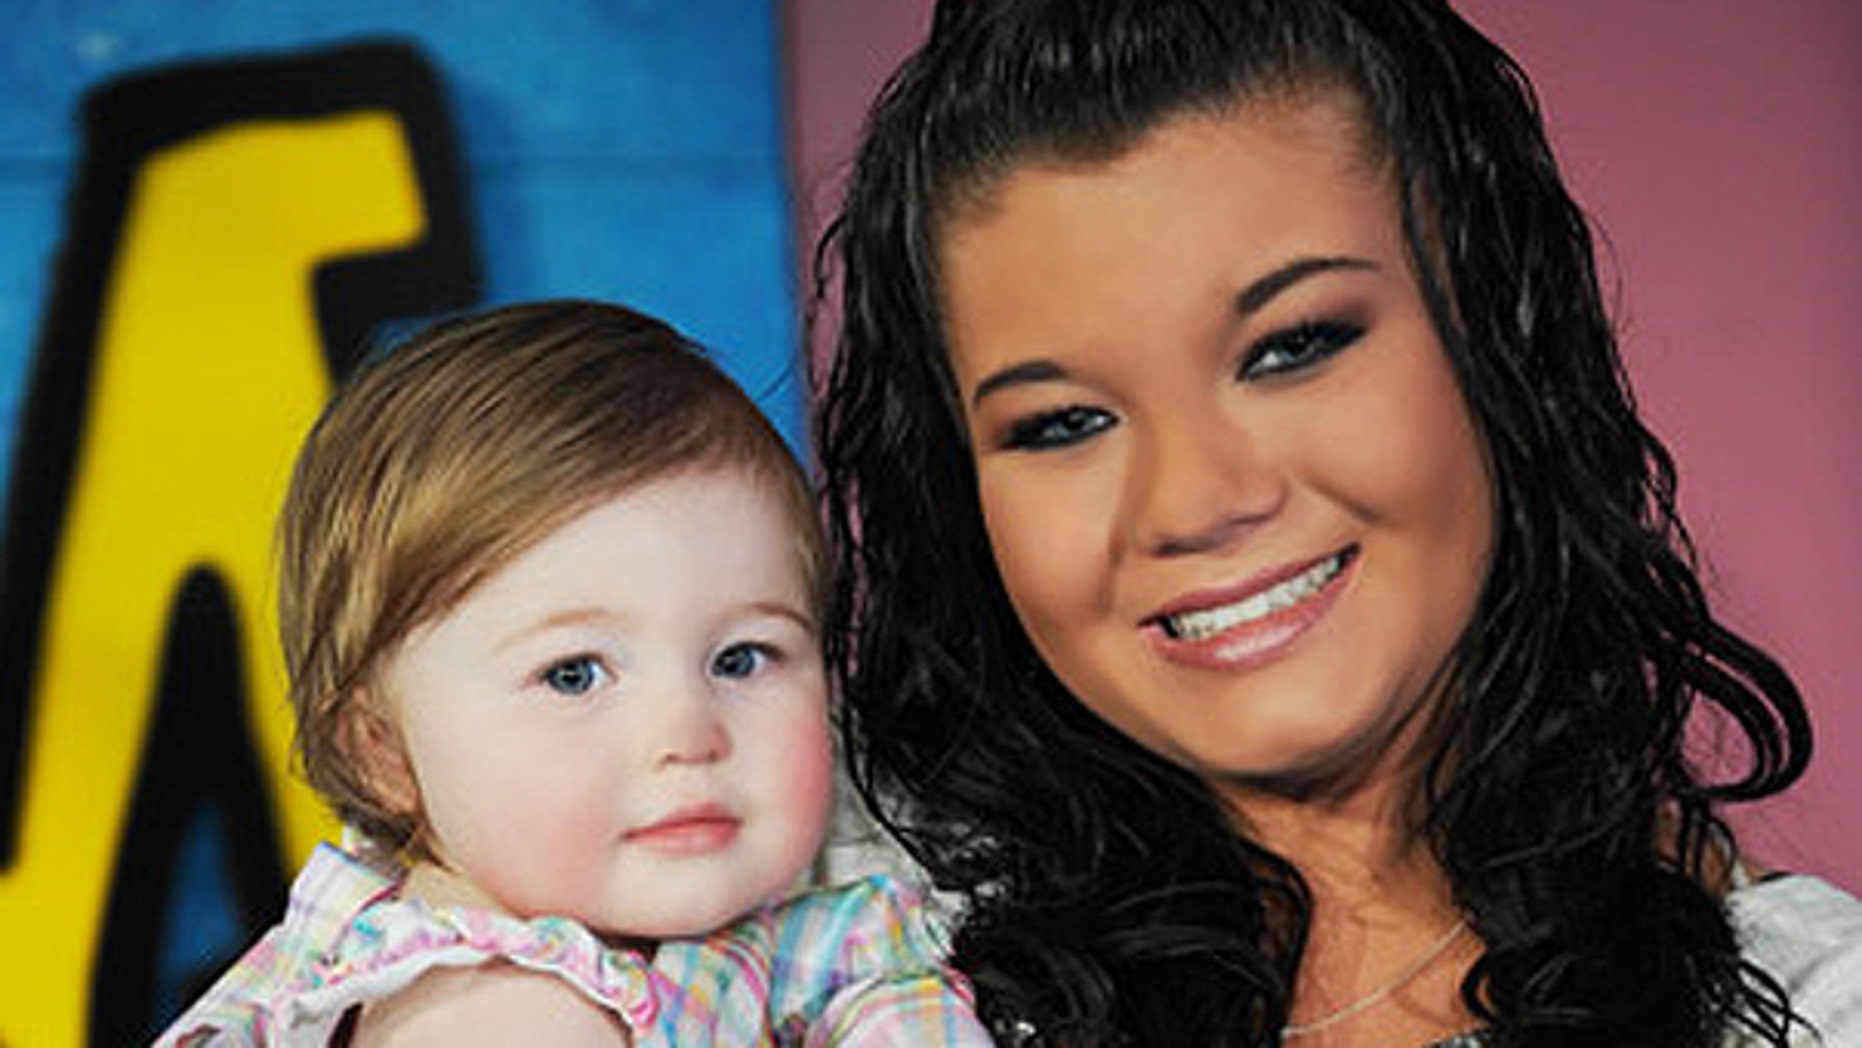 Lawyer Teen Moms Amber Portwood To Be Reunited With Daughter Fox News